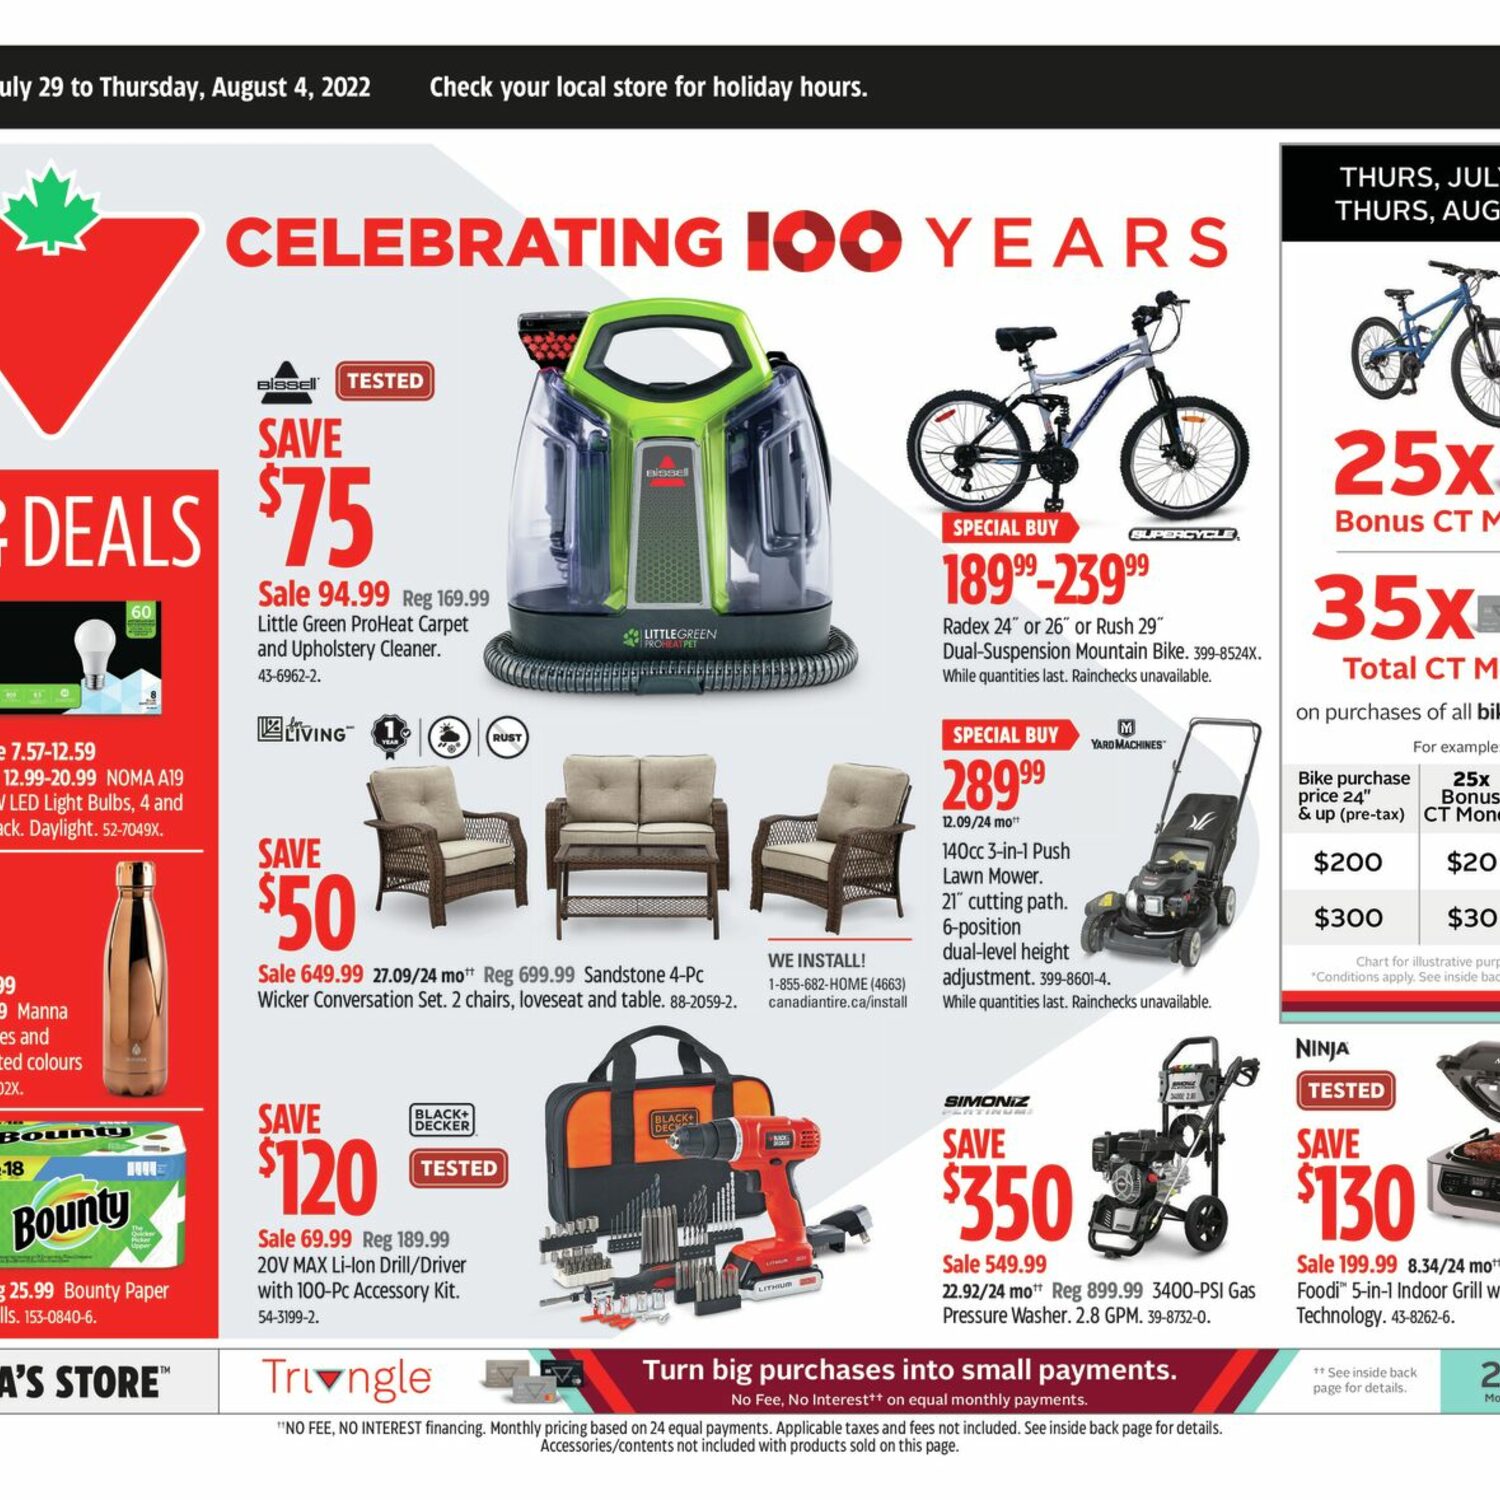 Canadian Tire Weekly Flyer - Weekly Deals - Celebrating 100 Years - Jul 29  – Aug 4 